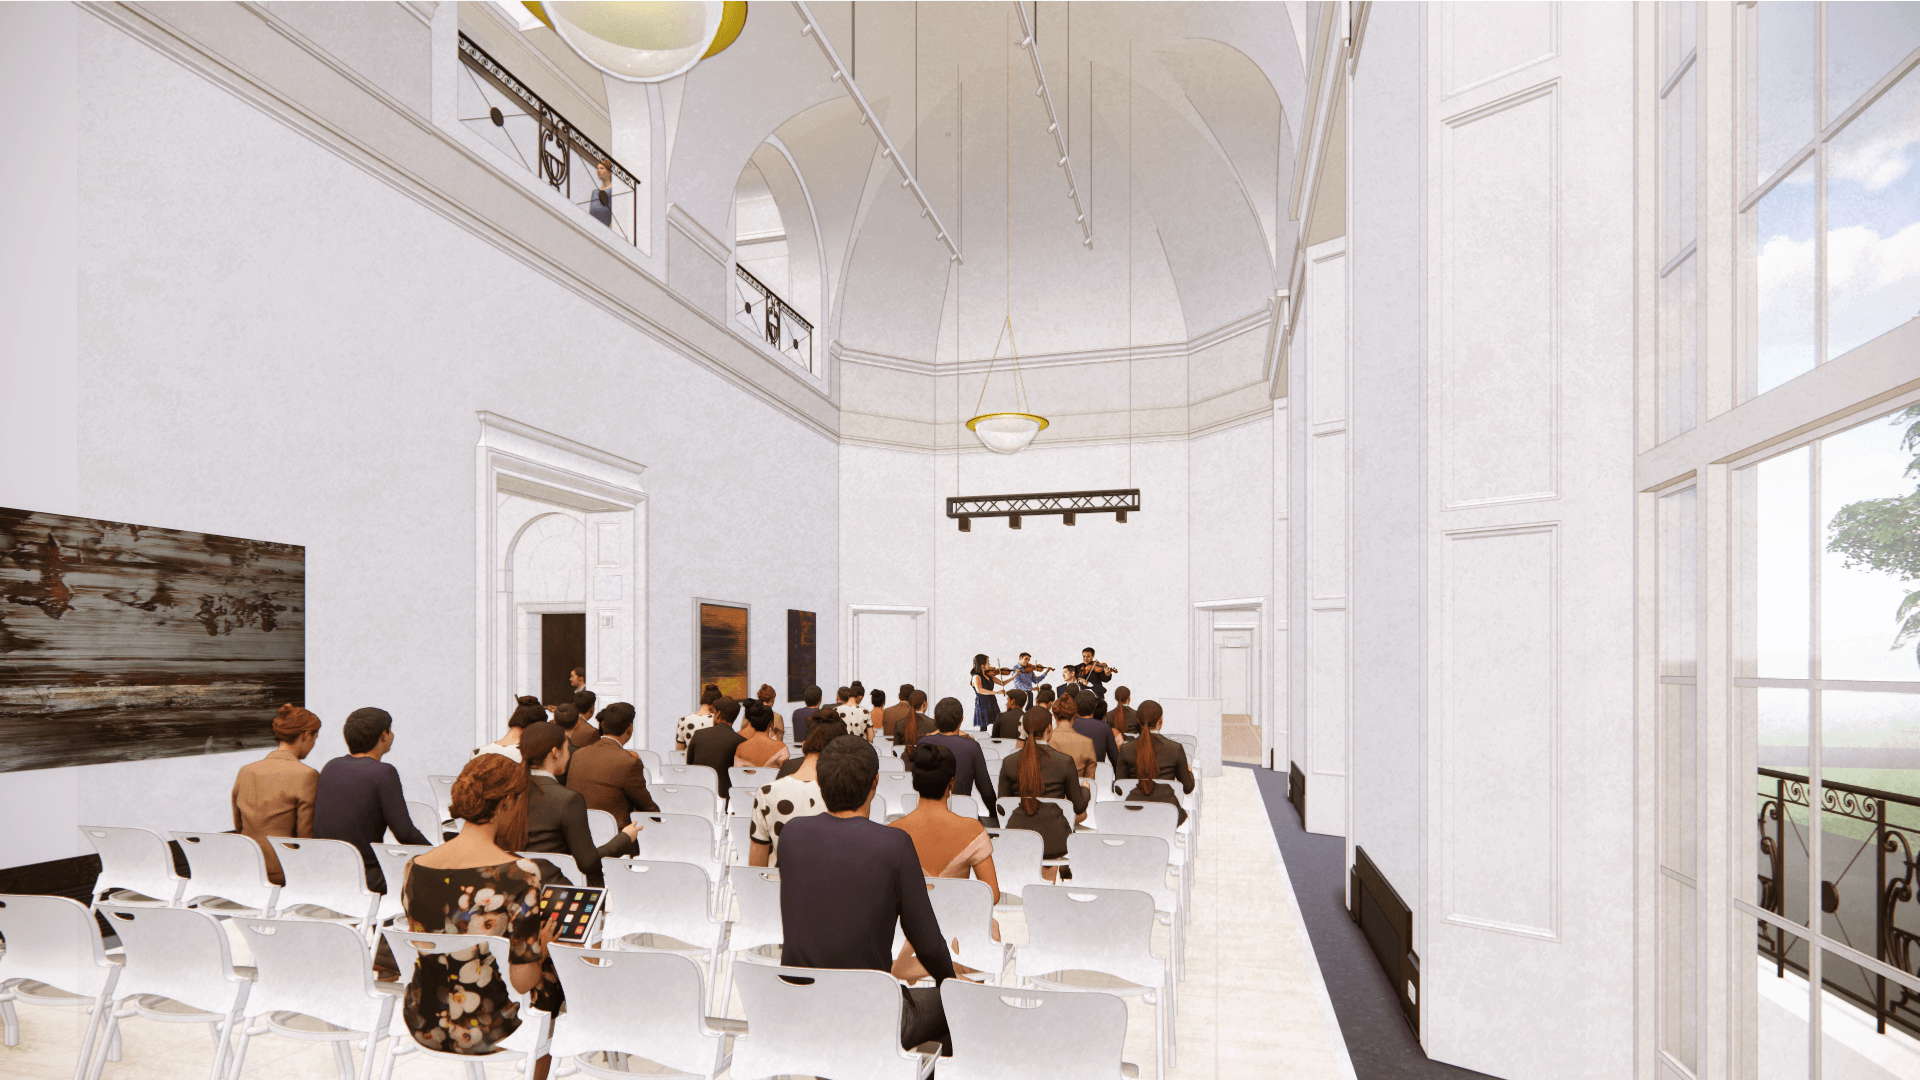 Interior rendering of a white church-like art gallery